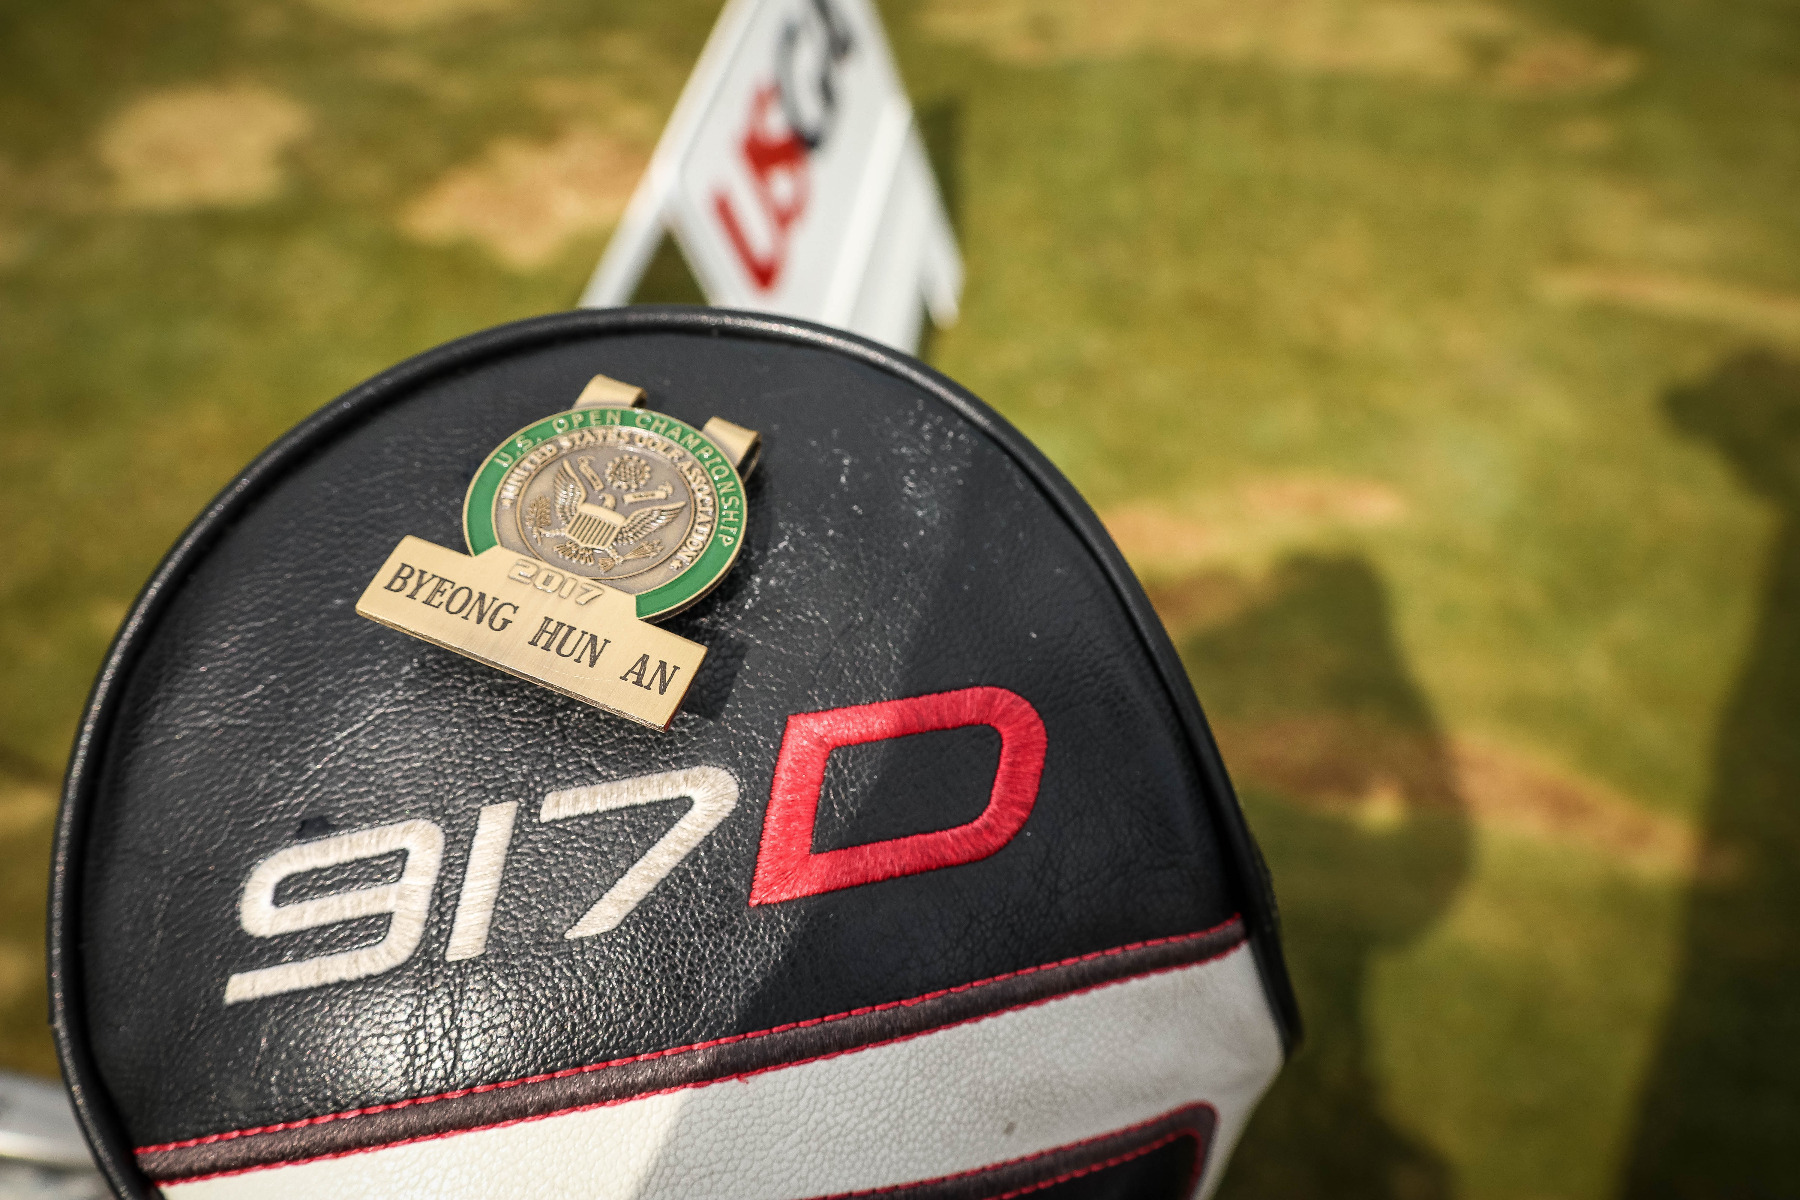 Spotted around the course this week: The coveted U...